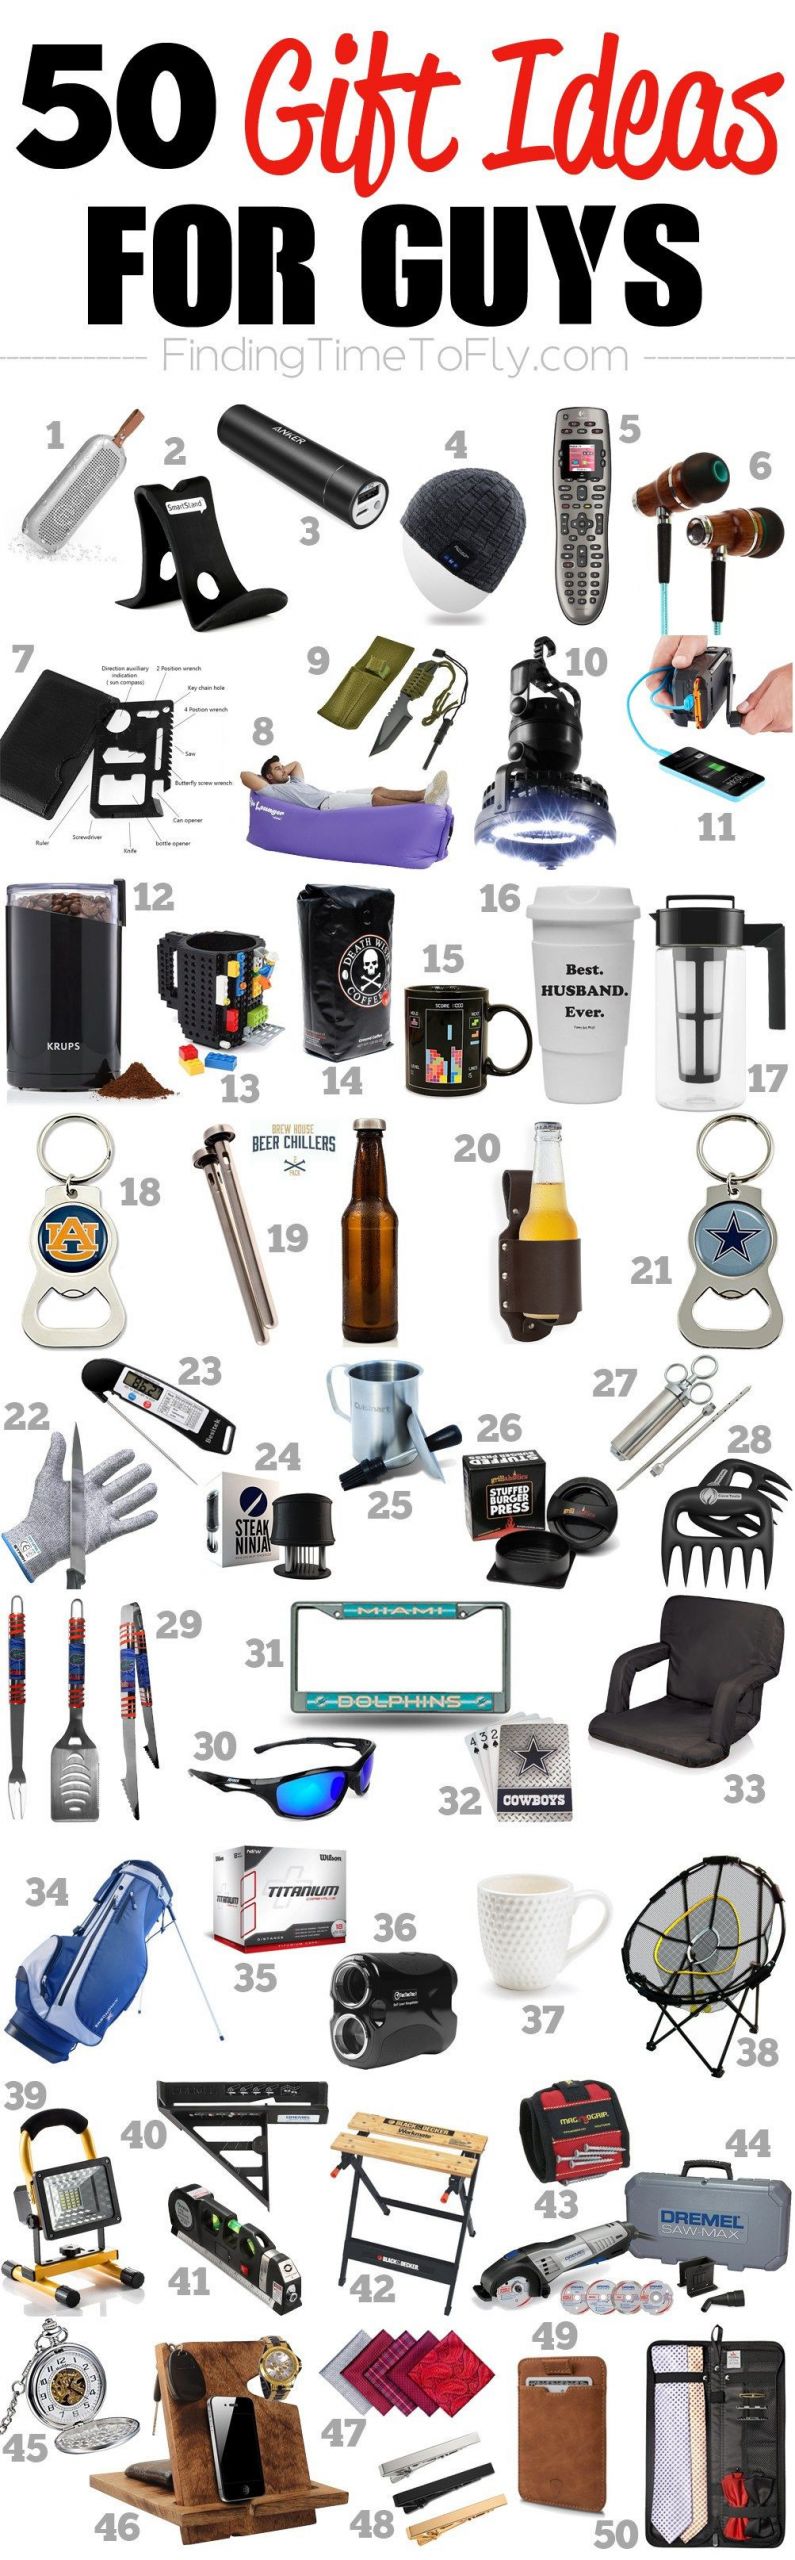 Graduation Gift Ideas For Guys
 50 Gifts for Guys for Every Occasion